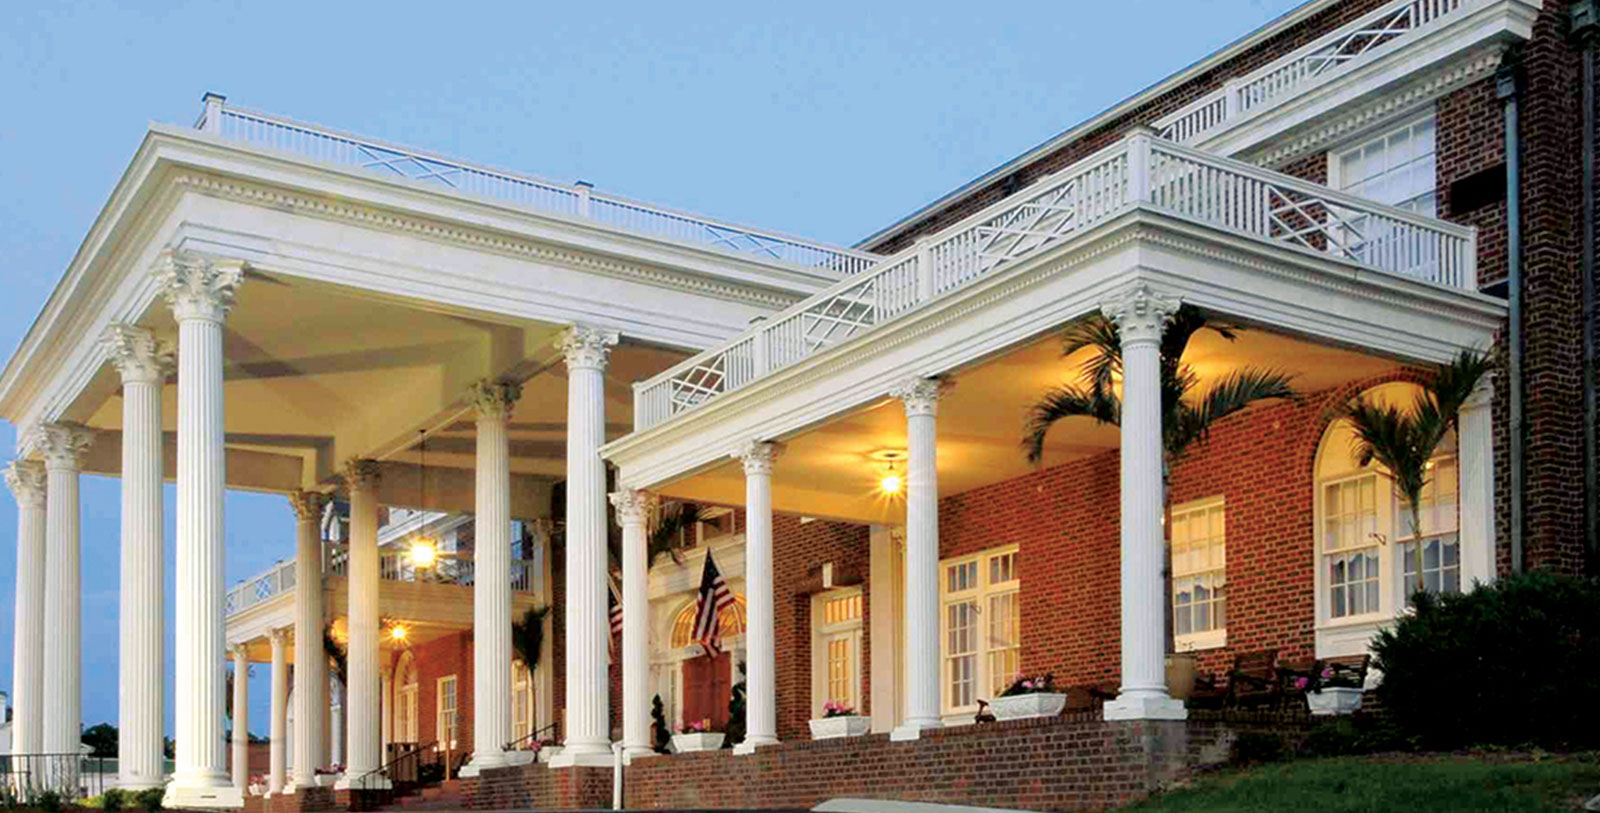 Discover the Georgian Revival architecture of The Mimslyn Inn.